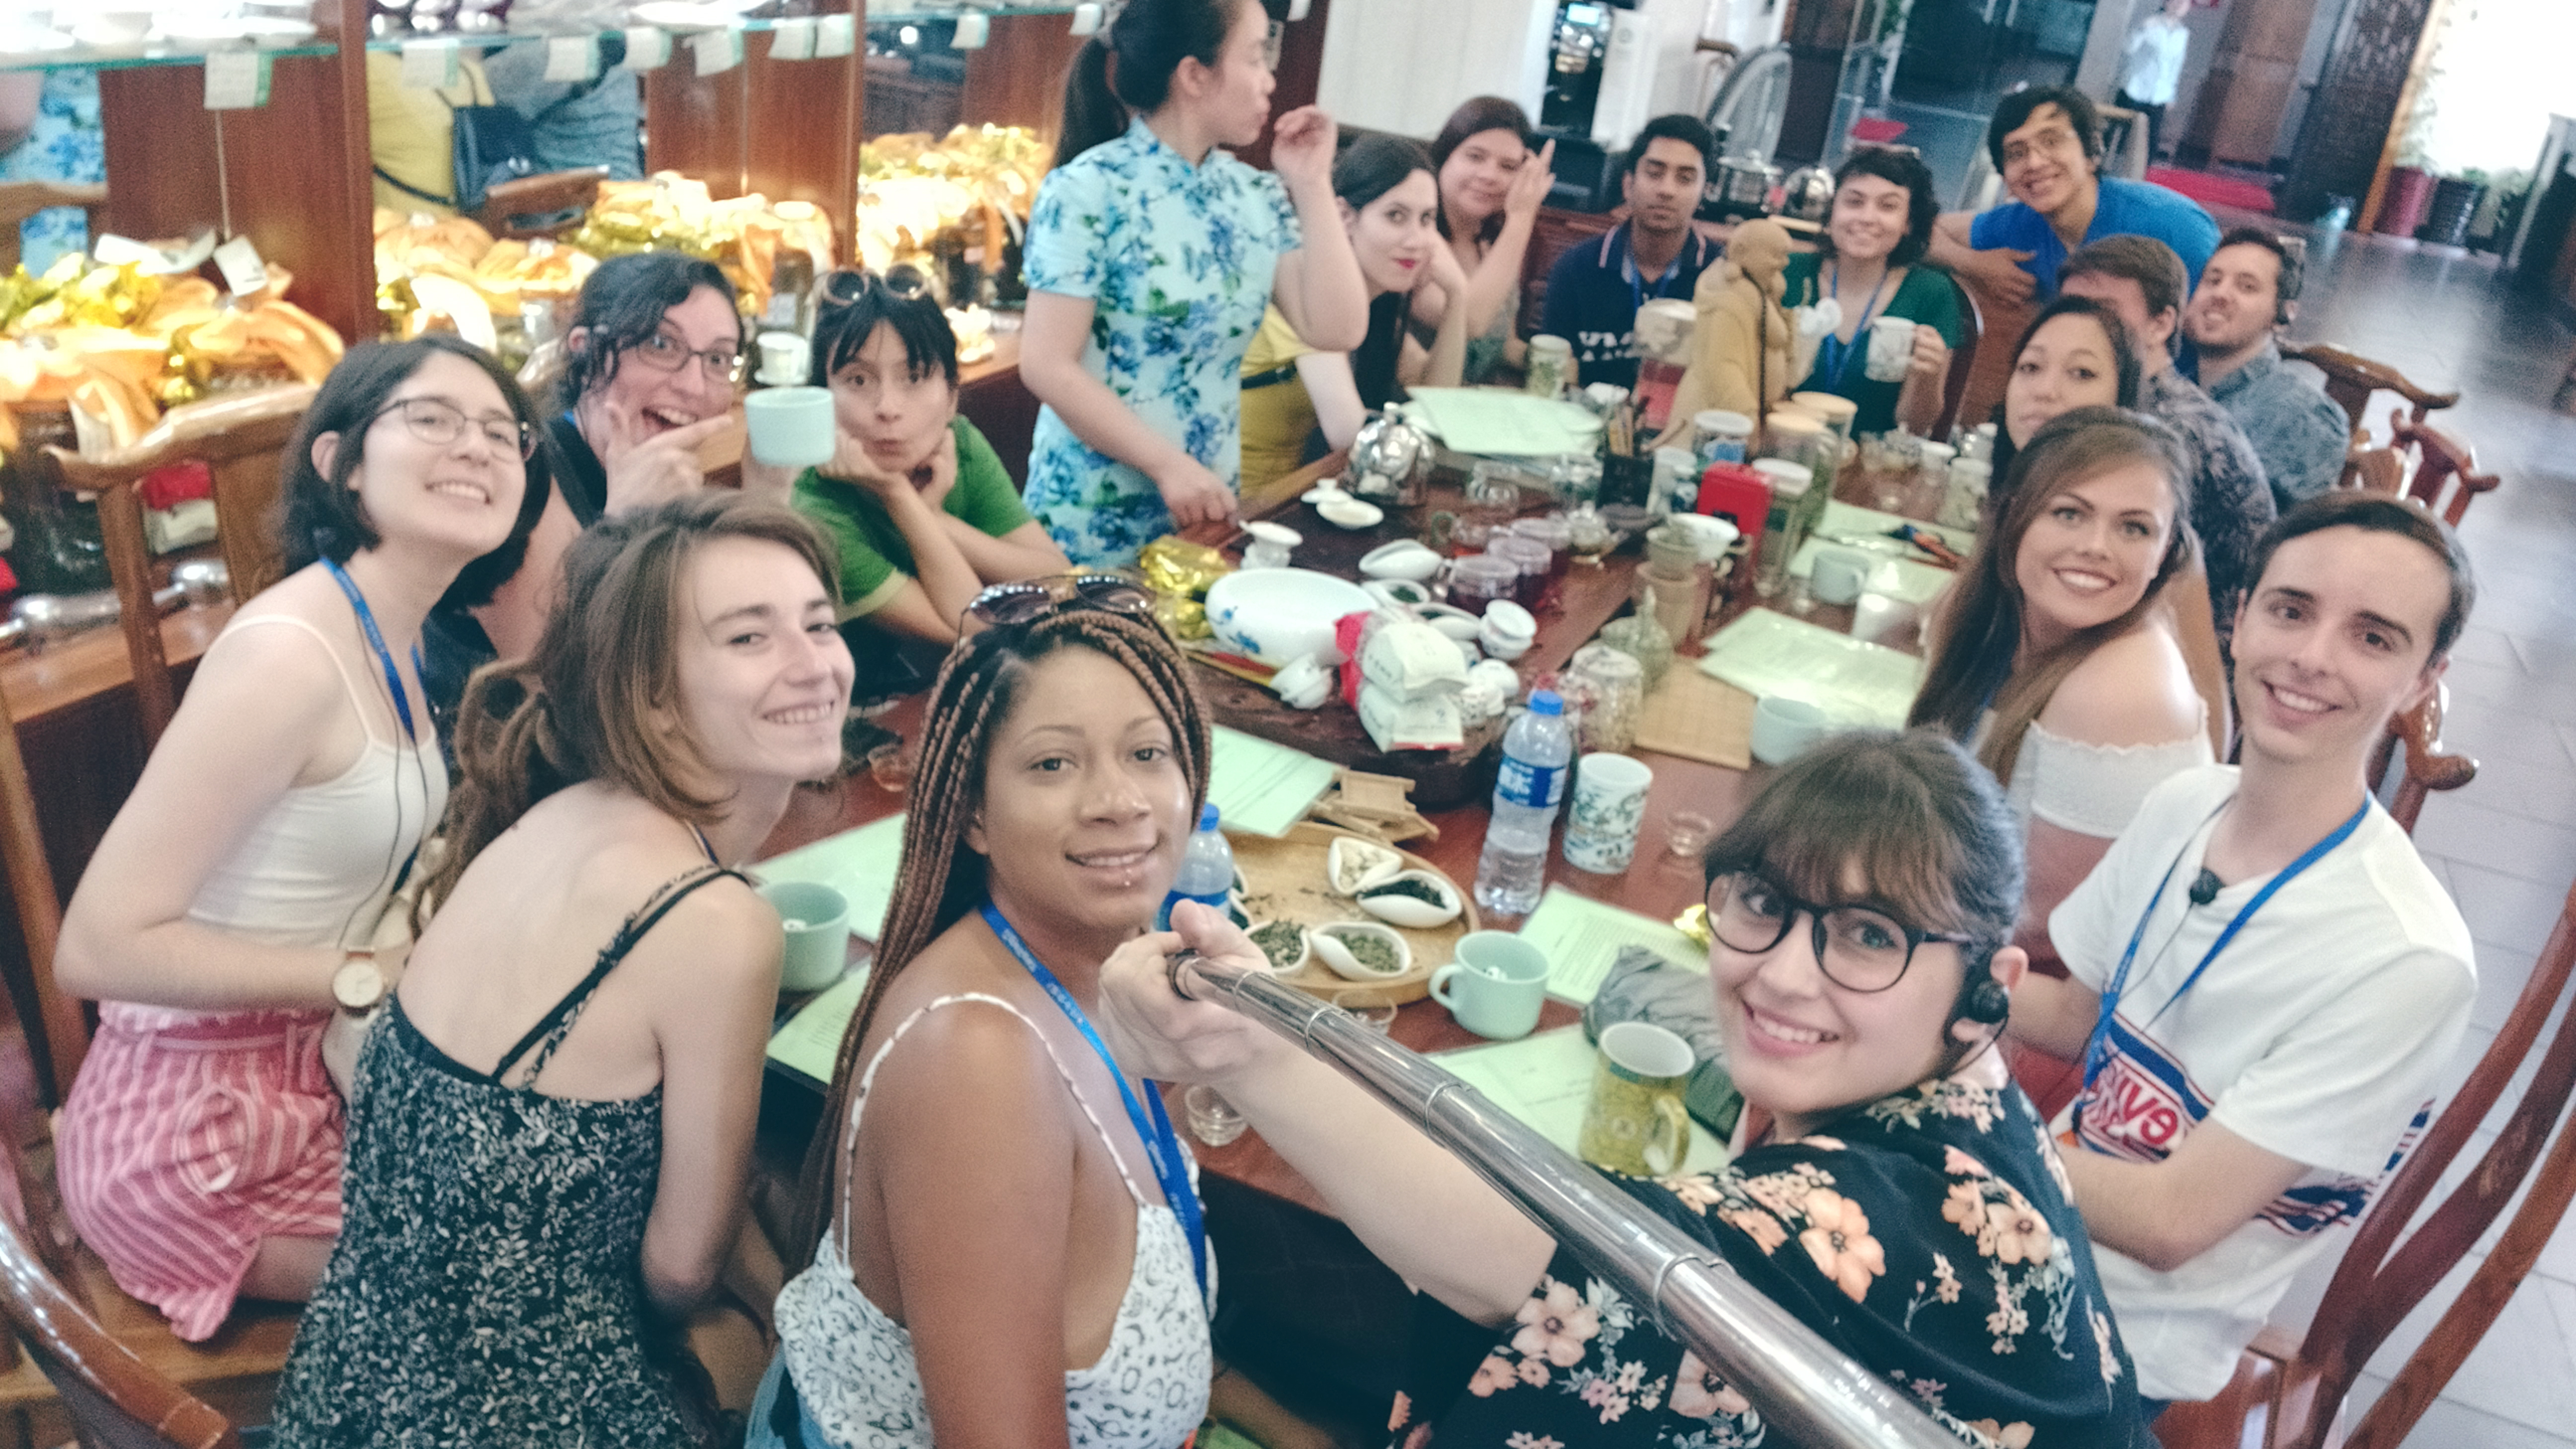 Thoughtworker women having a meal together